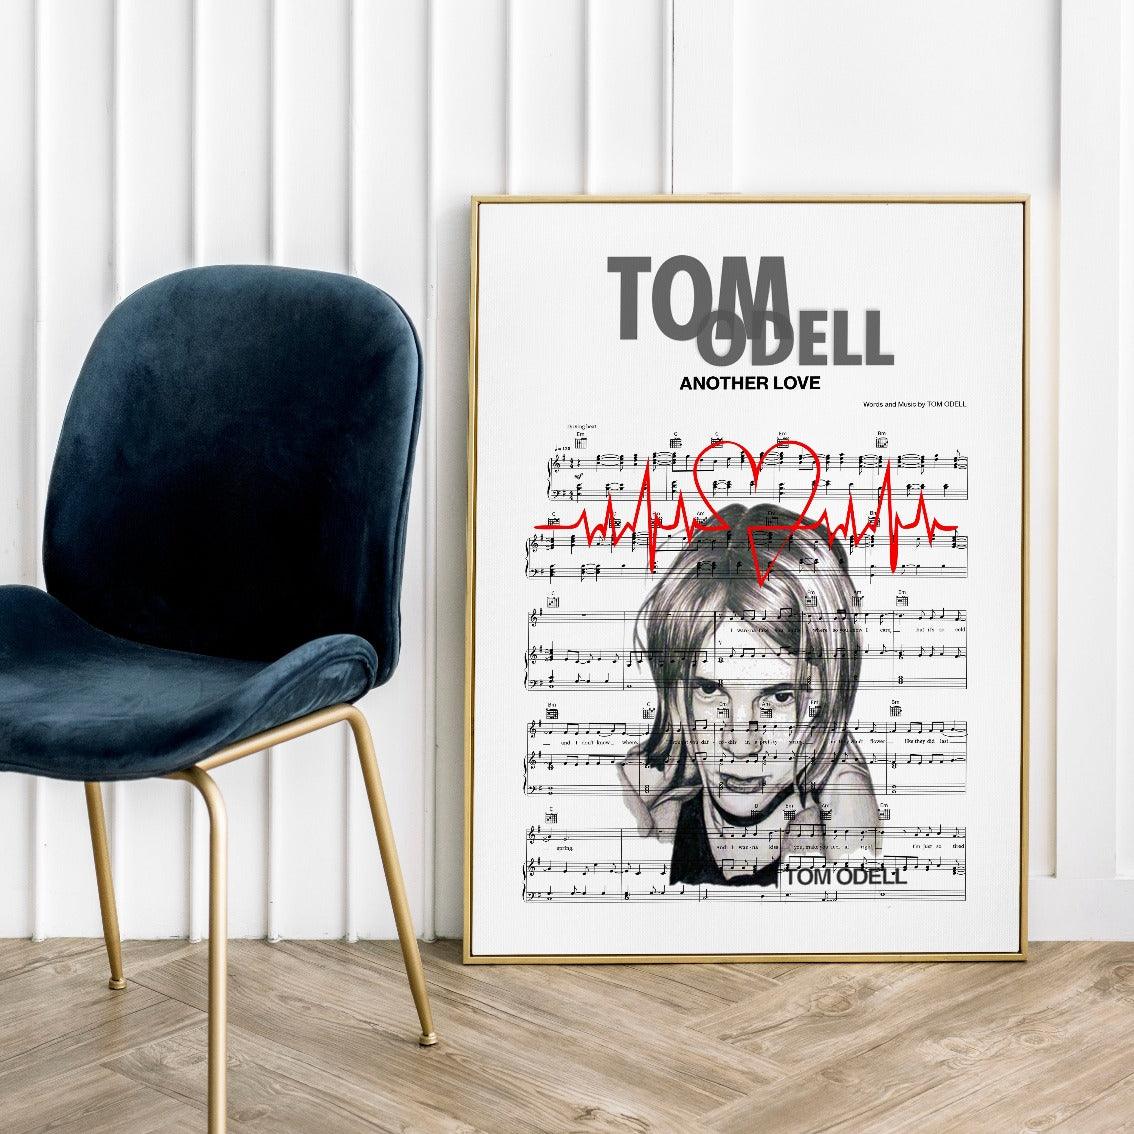 Add some musical inspiration to your home with this Tom Odell - ANOTHER LOVE Poster. This poster is a great way to show off your taste in music and add some personality to your space. With its simple design, it can easily be combined with other wall art to create a stylish gallery wall. It's also a great conversation starter for any music lover.